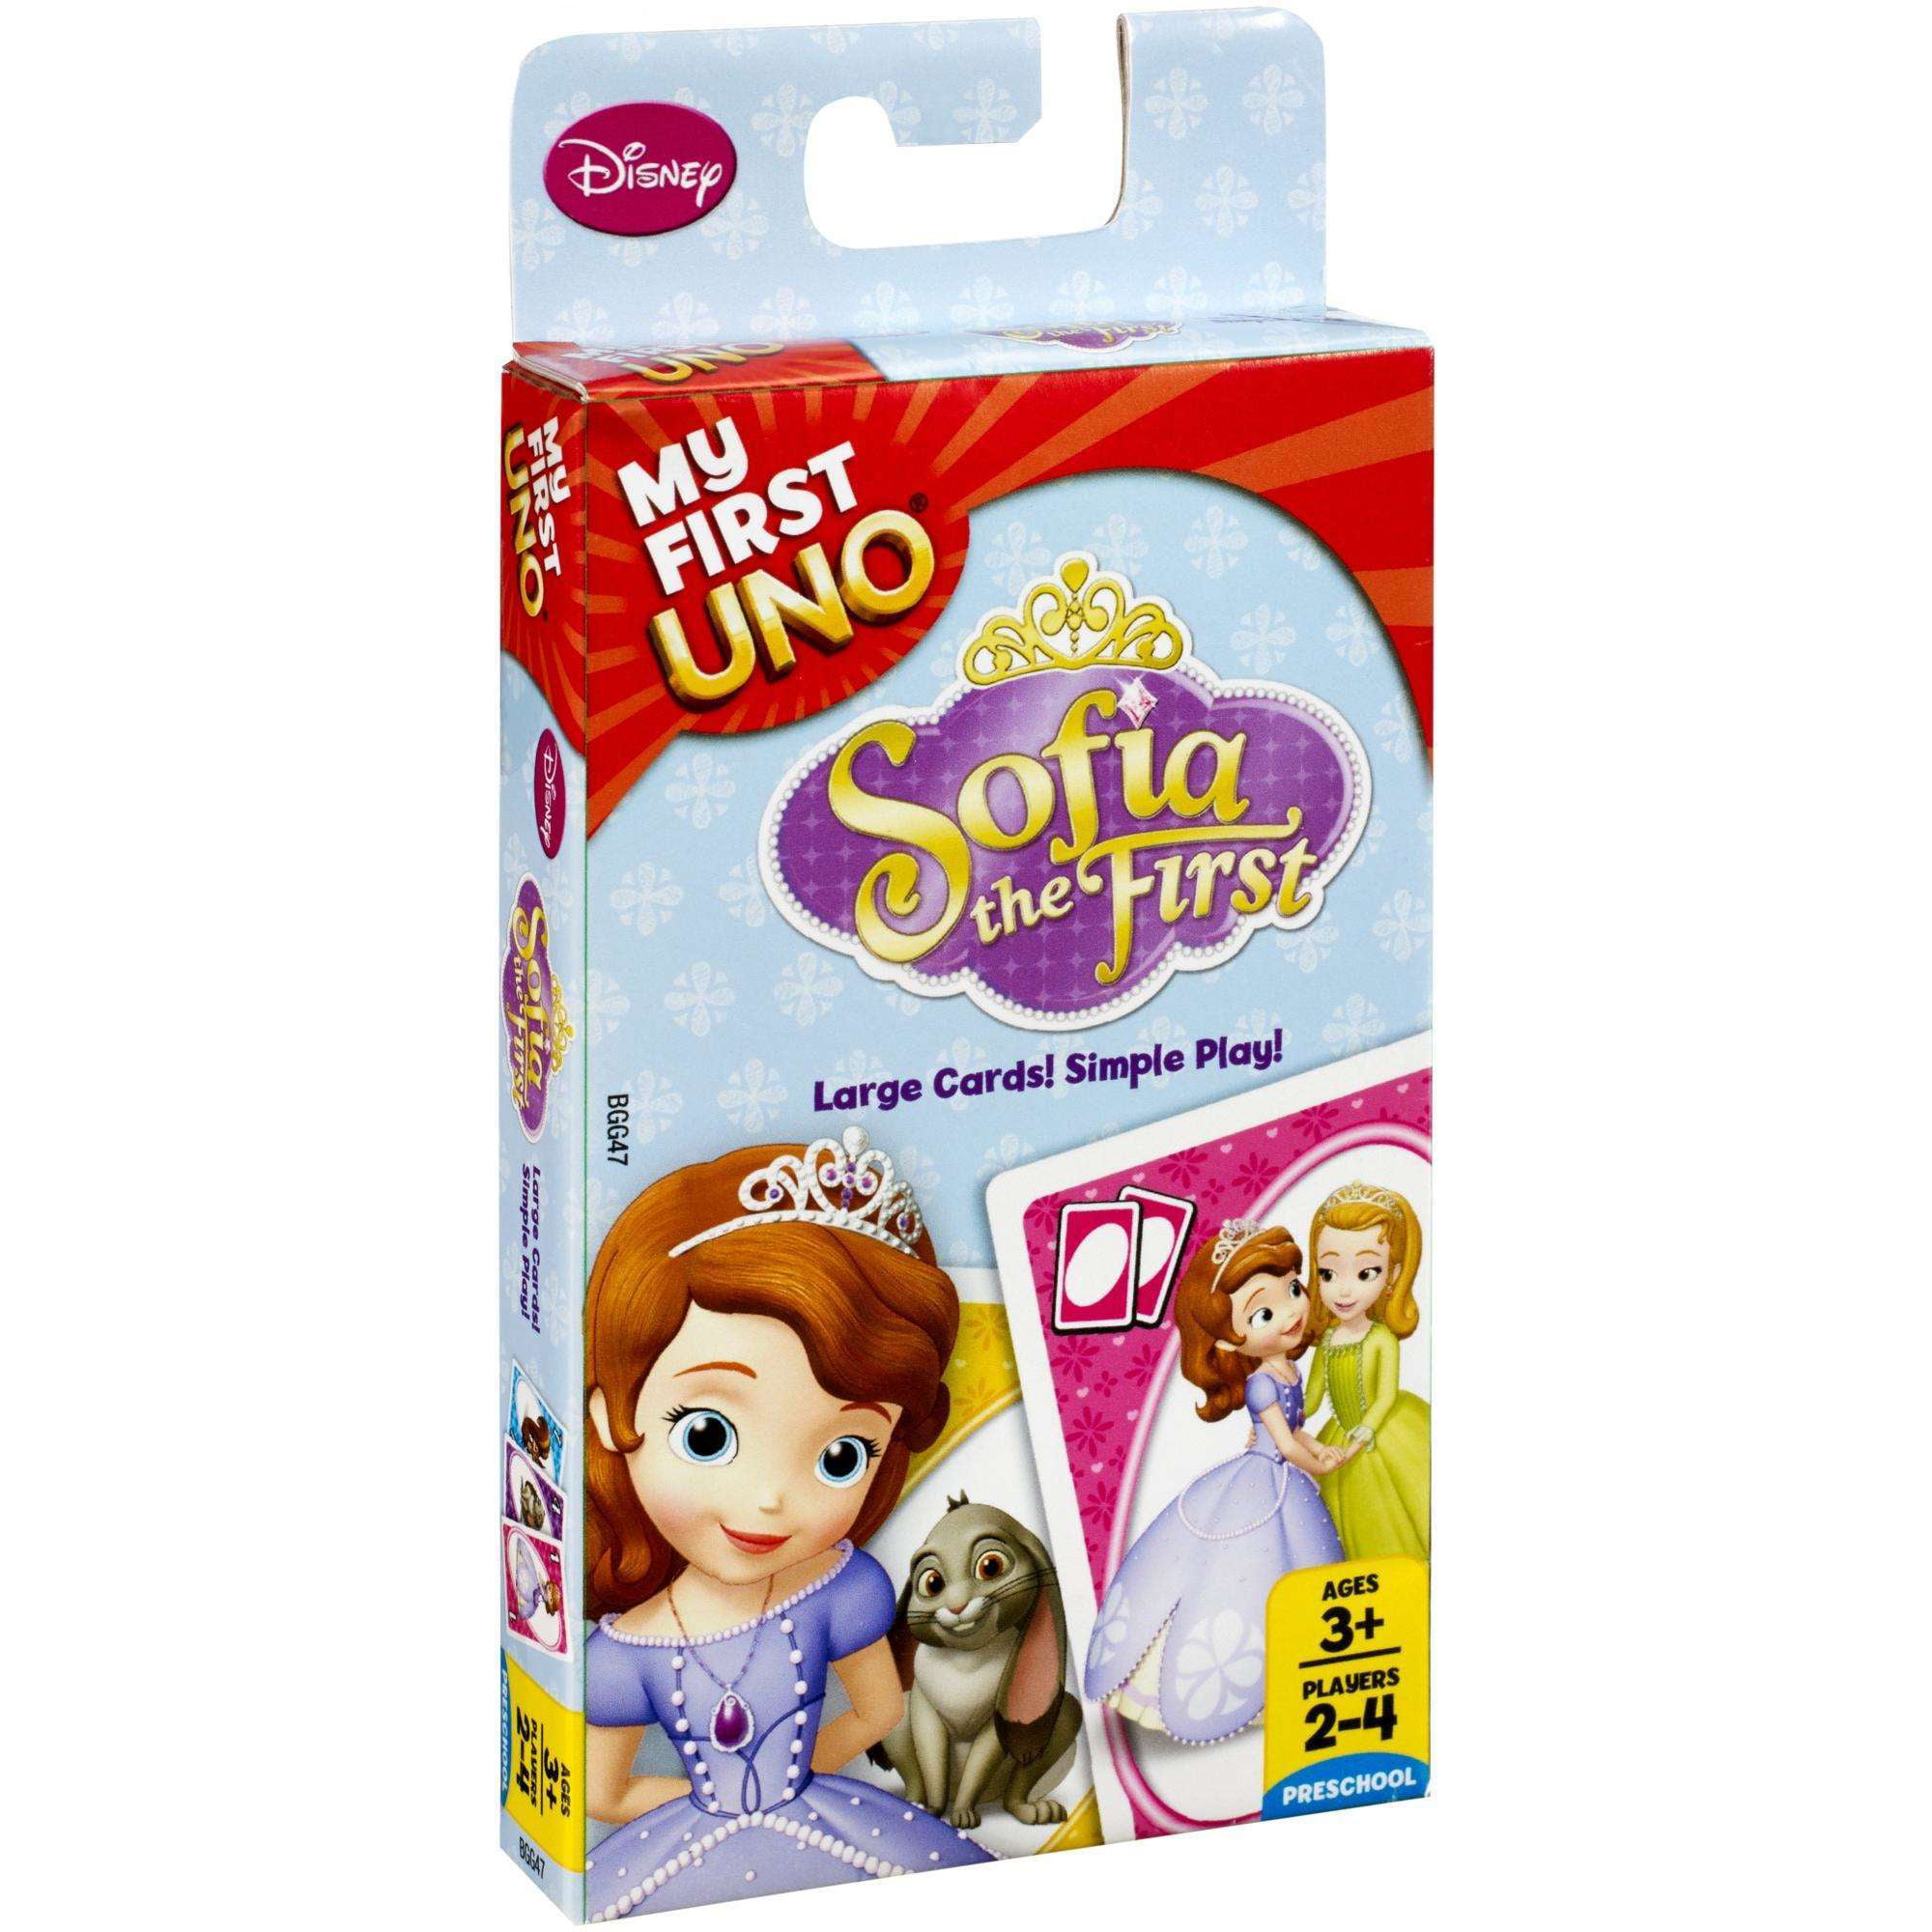 Disney Cardinal sofia the First UNO Card Game in A Tin Pre-owned -   Sweden